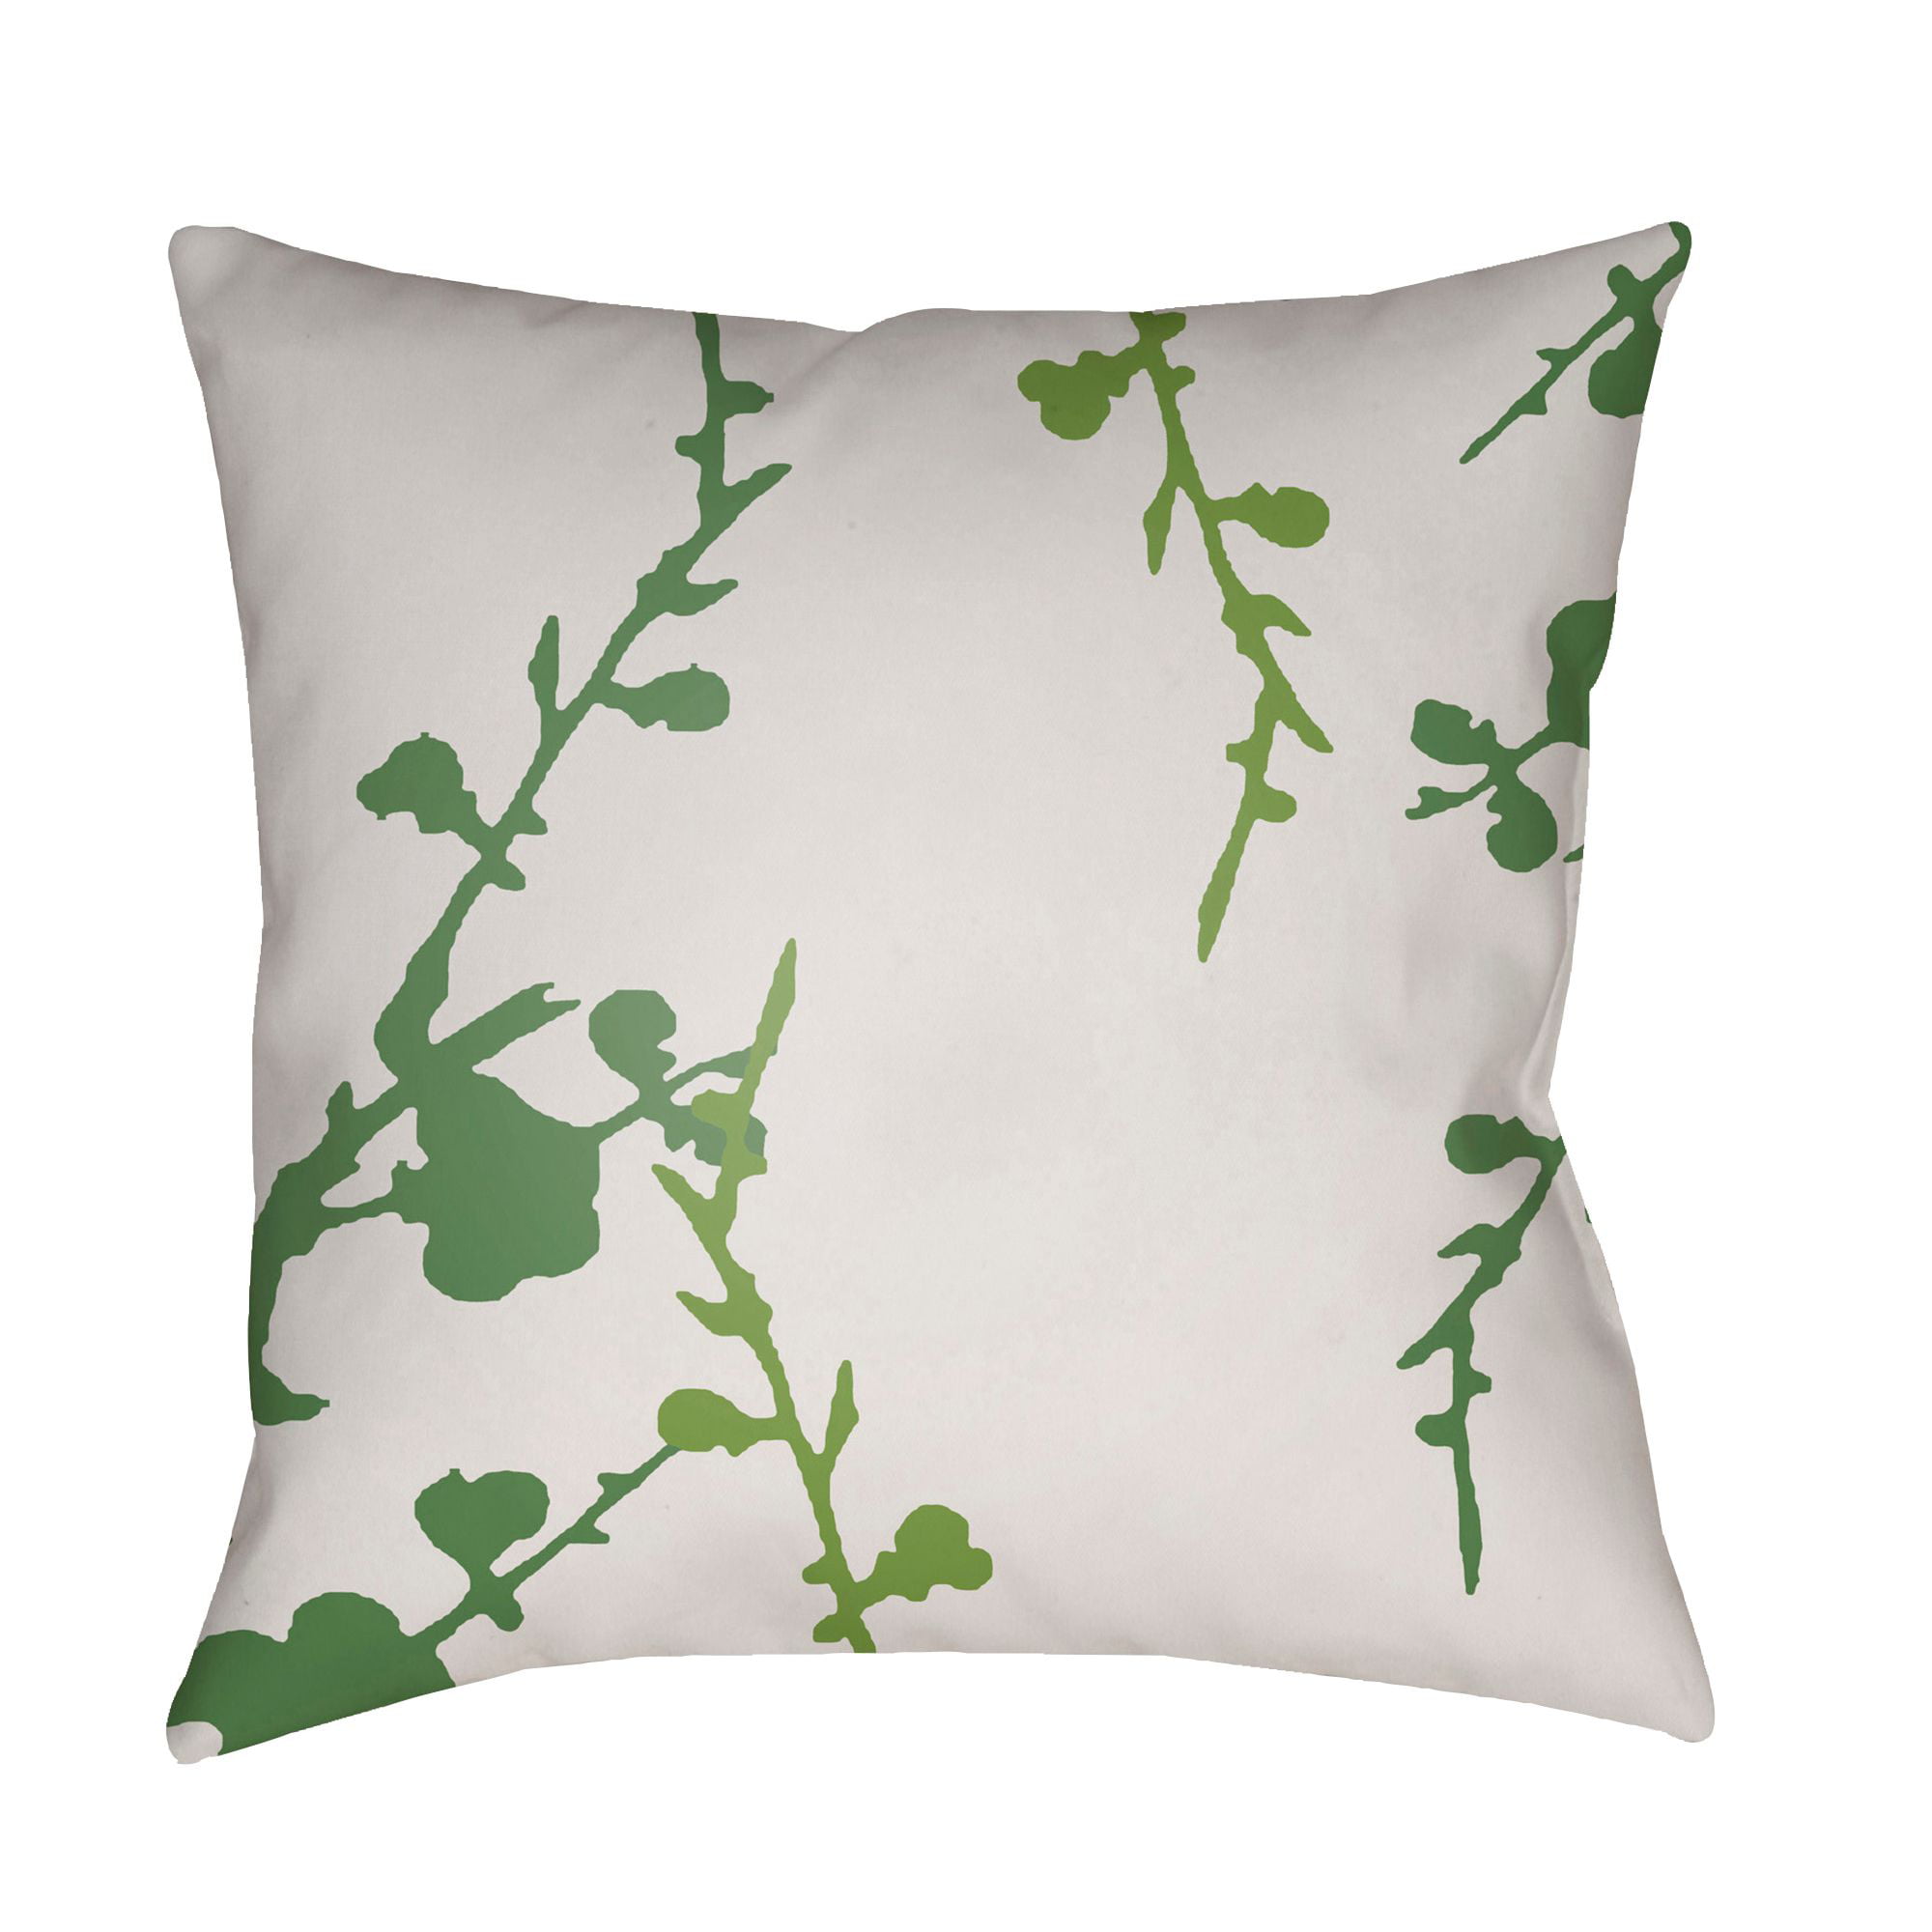 22" White and Green Floral Square Throw Pillow Cover with Knife Edge